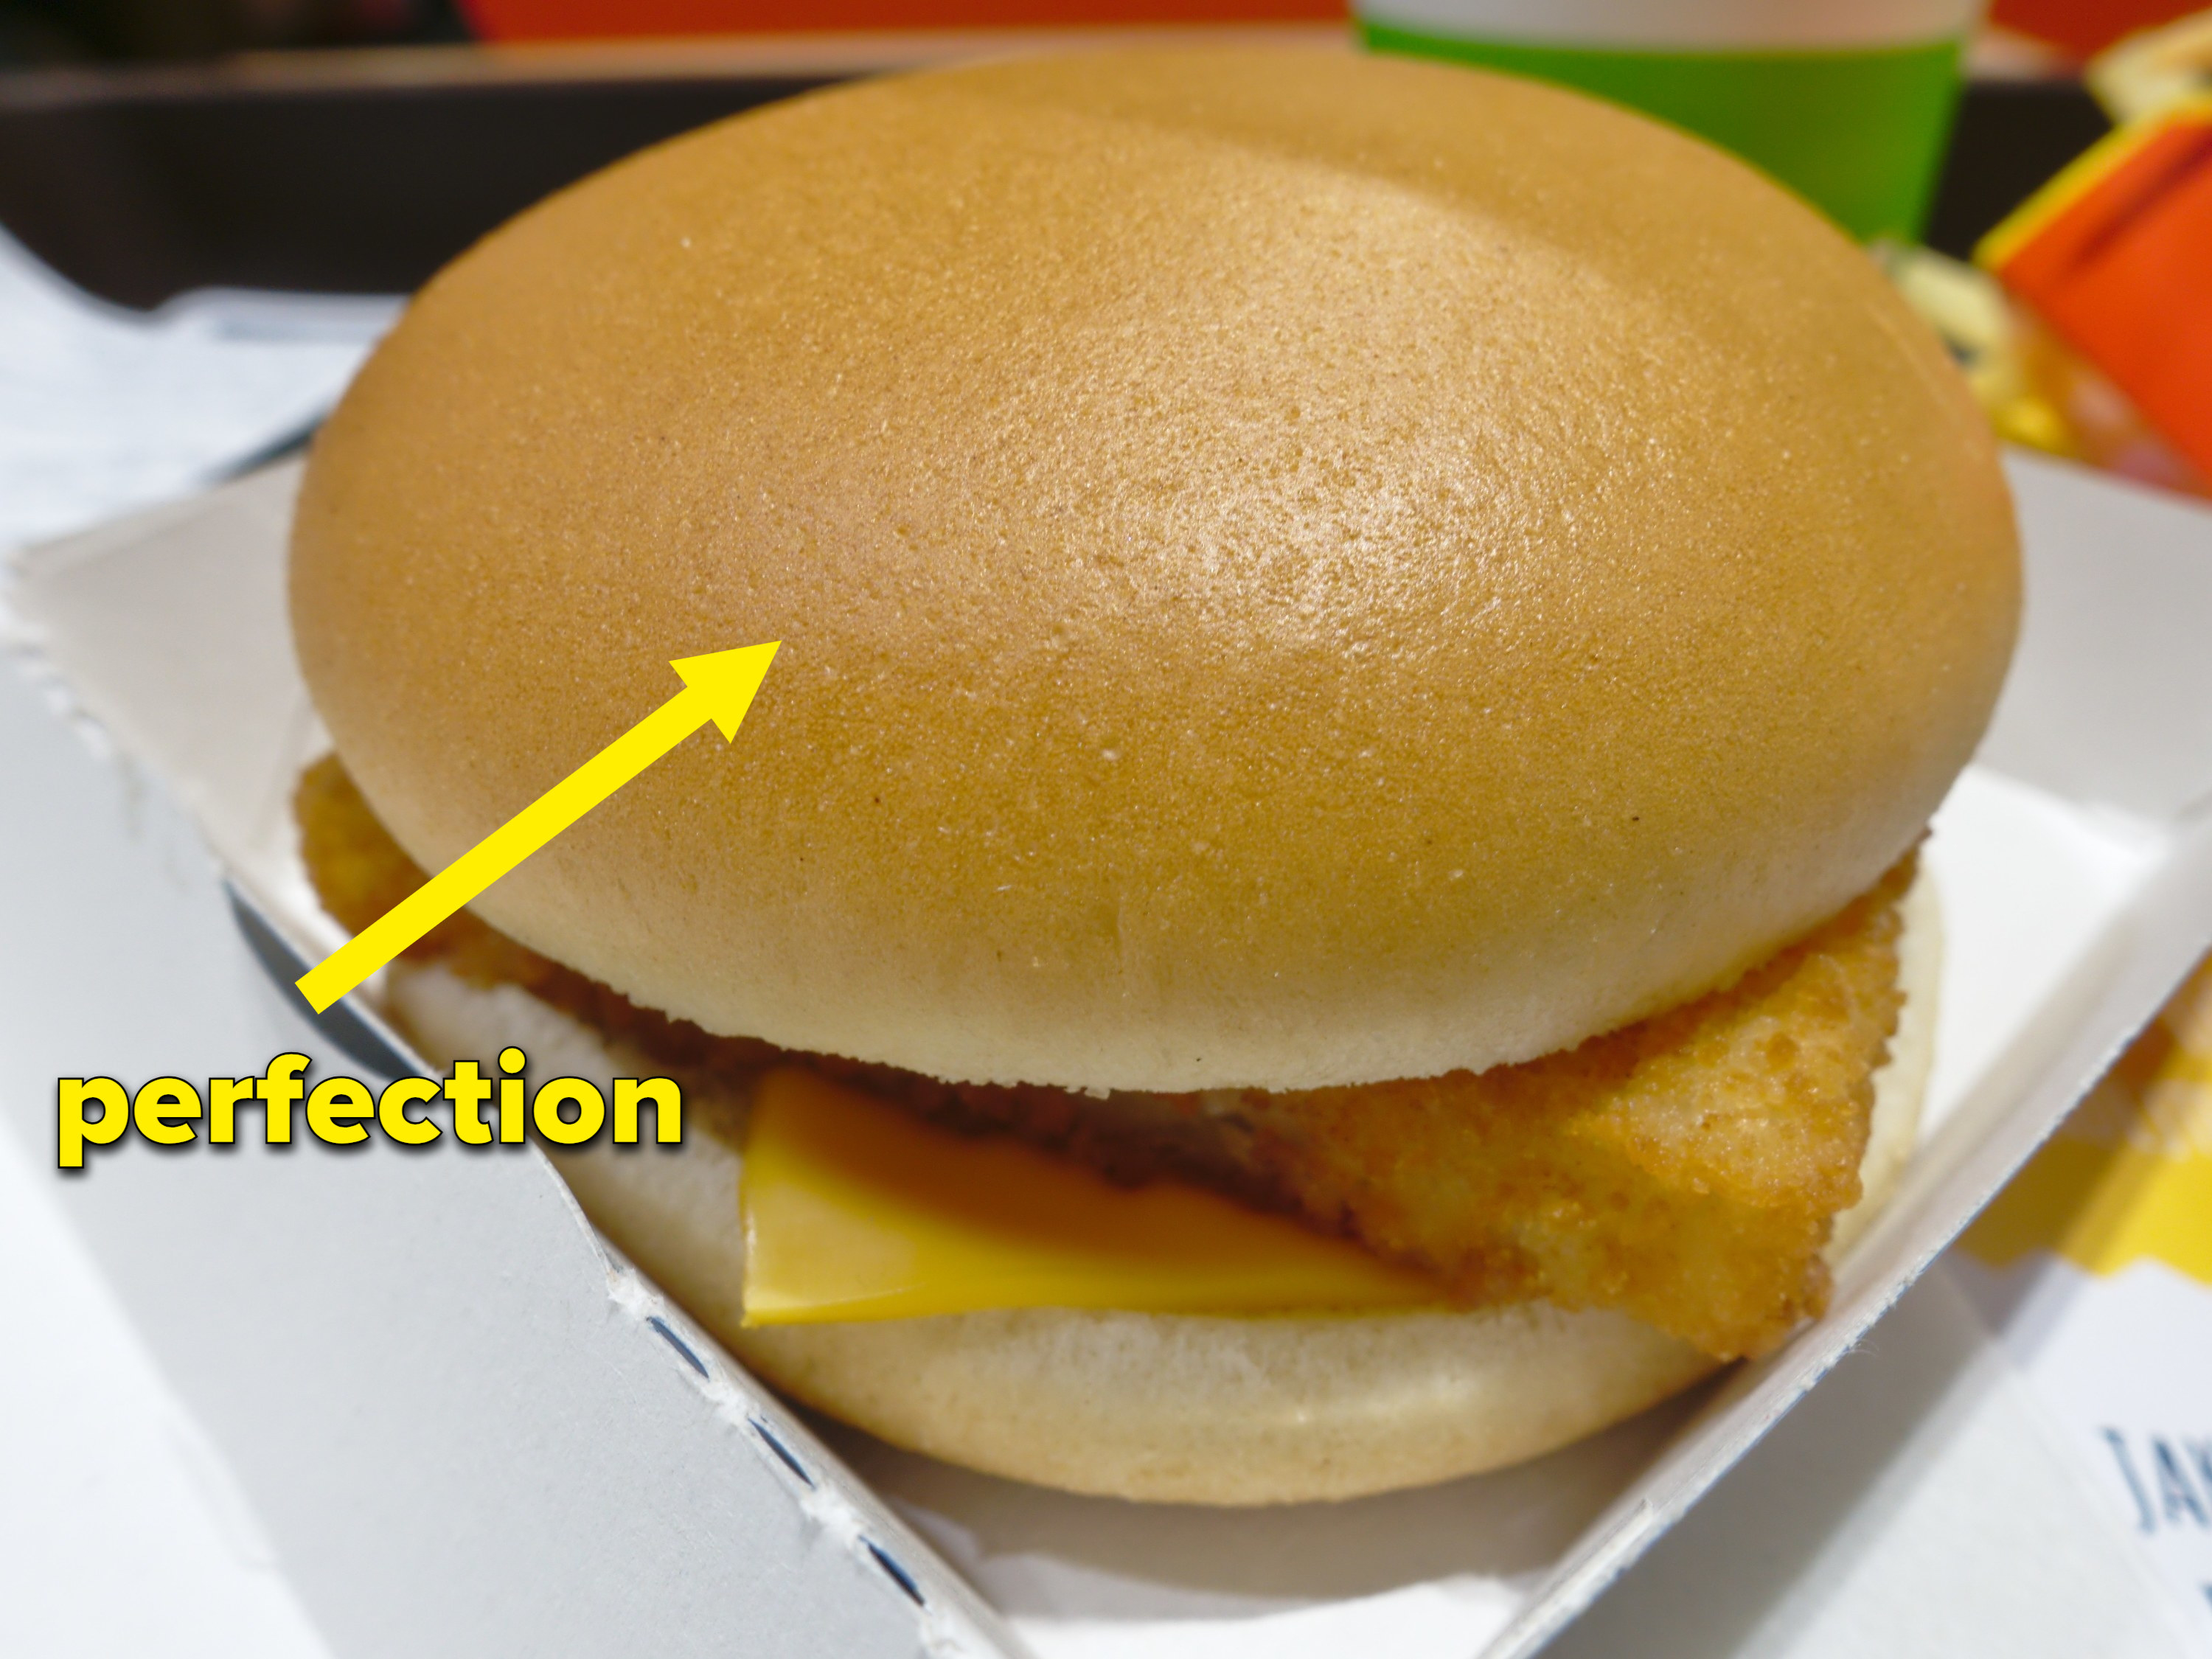 A Filet-O-Fish burger; there is an arrow pointing the steaming bun with text saying &quot;perfection&quot;